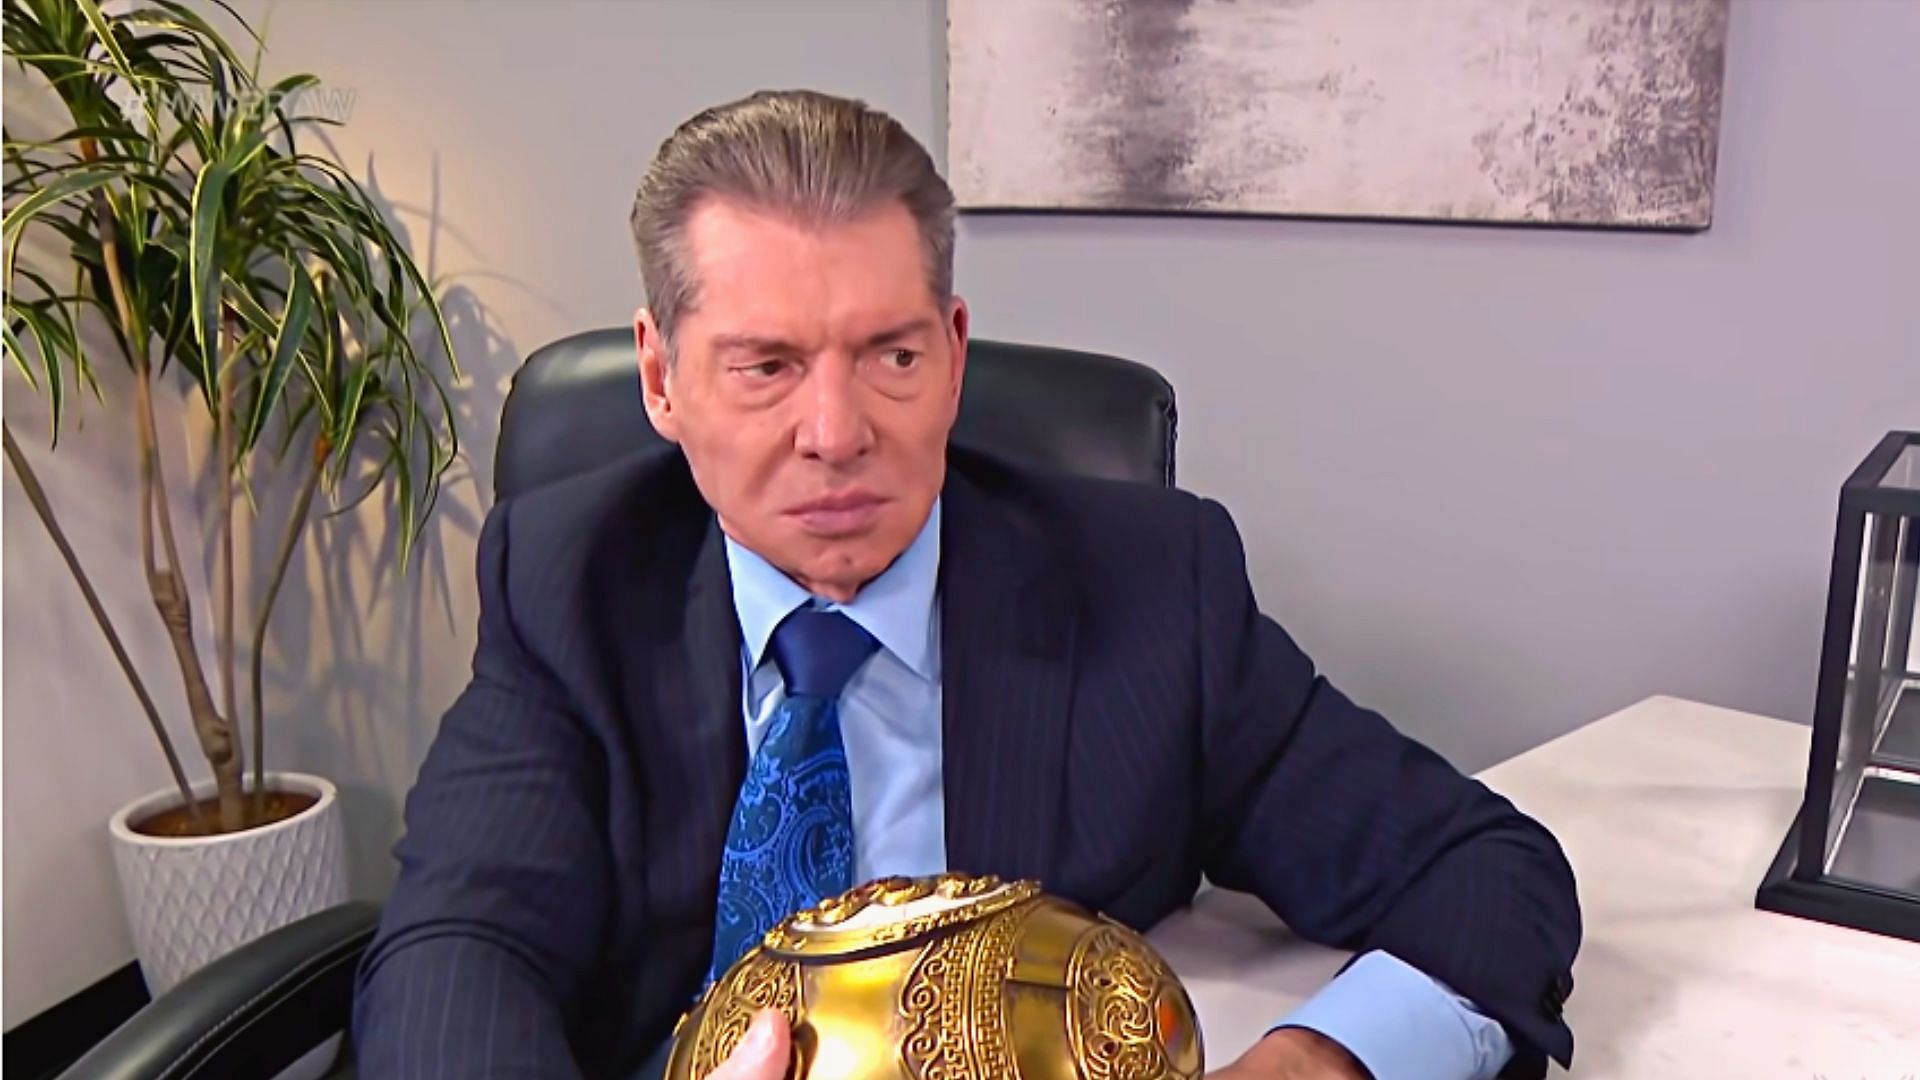 Vince McMahon appeared on this week's RAW to continue the golden egg storyline.